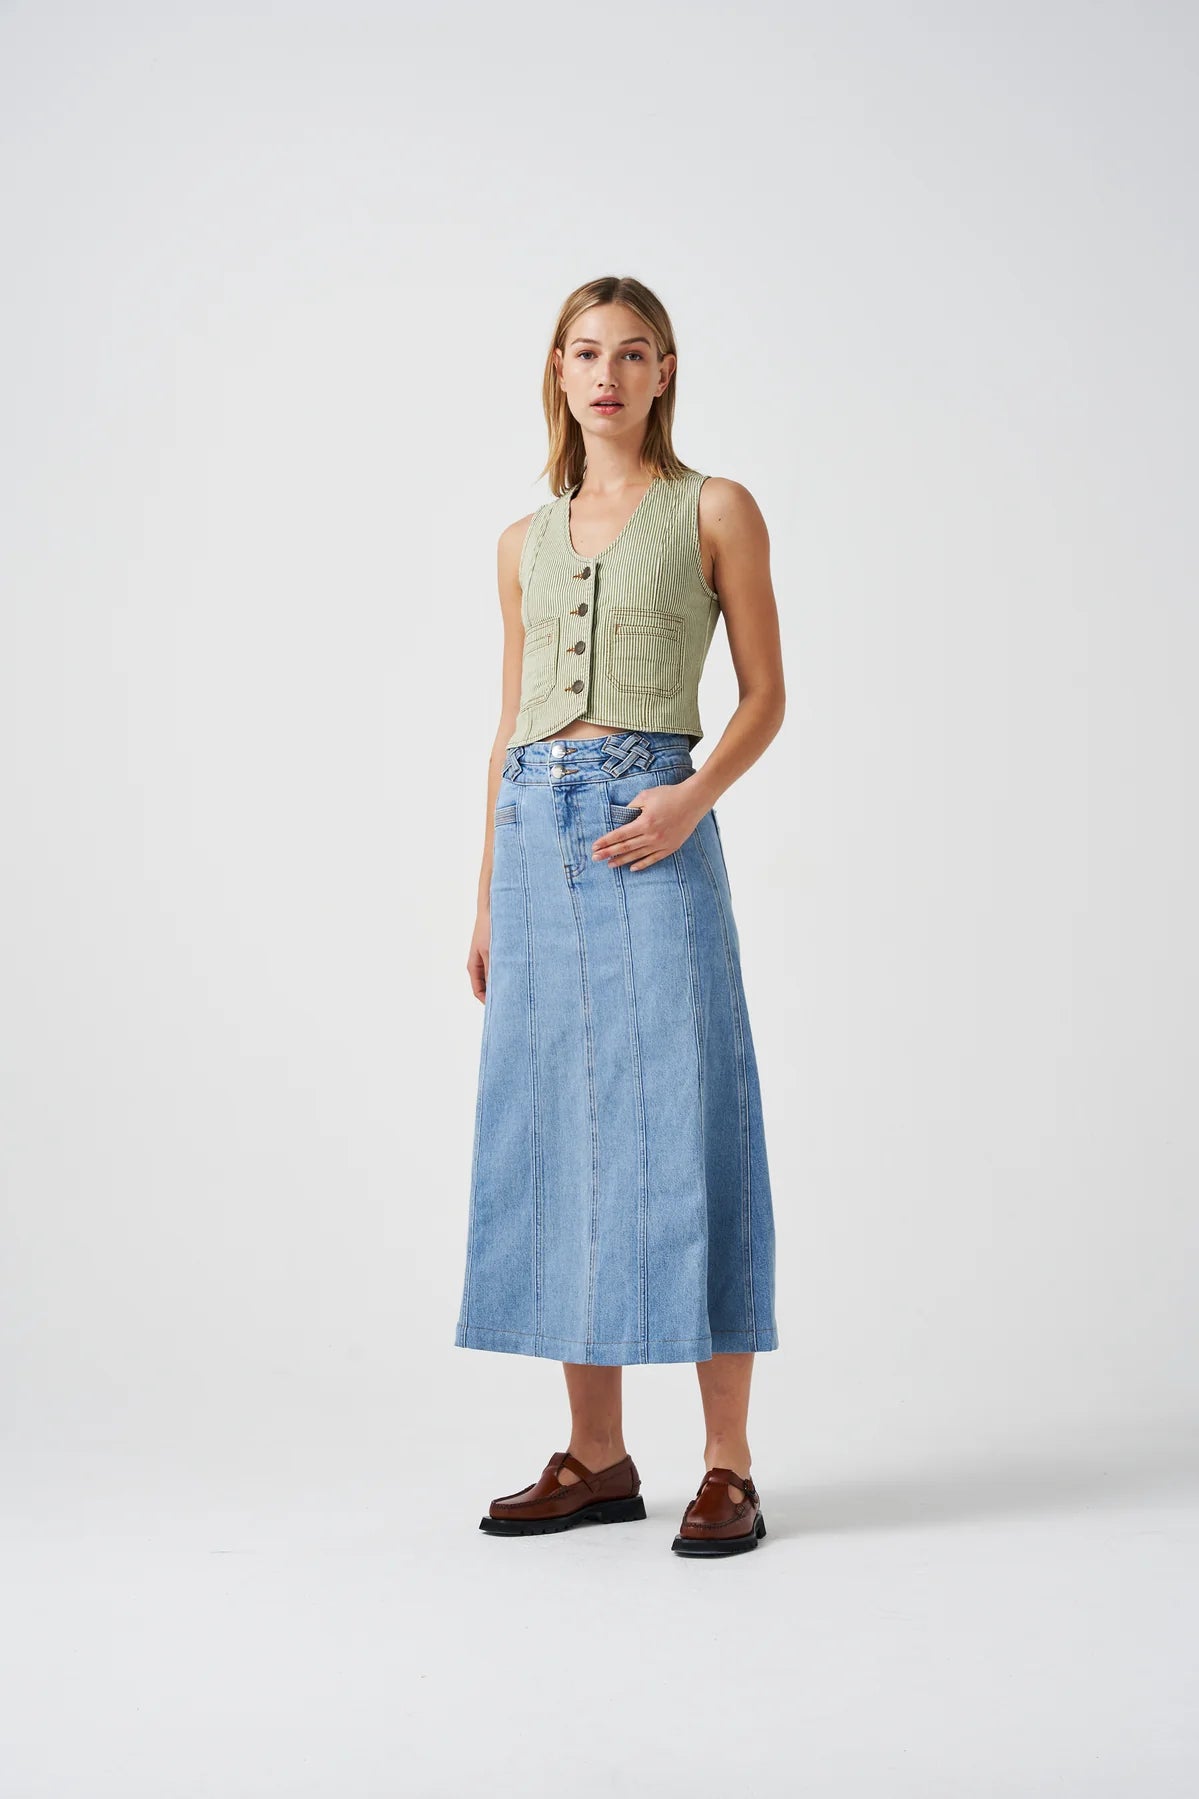 S&M Willow Skirt in Rodeo Vintage